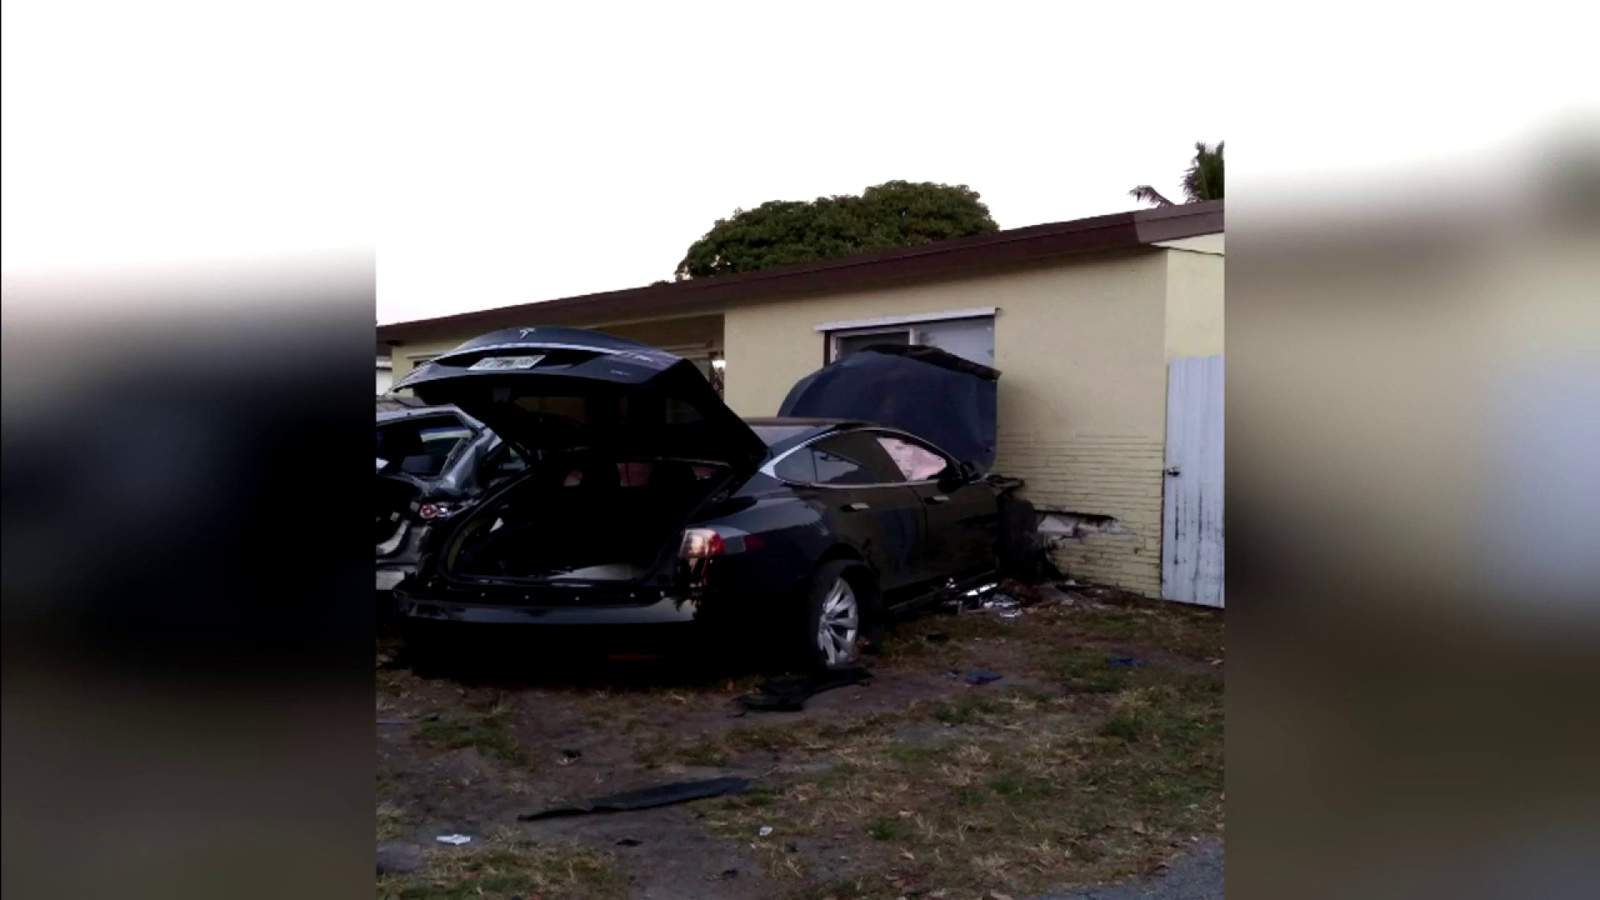 High speed could be the cause of the driver who hit Tesla at home in Miramar